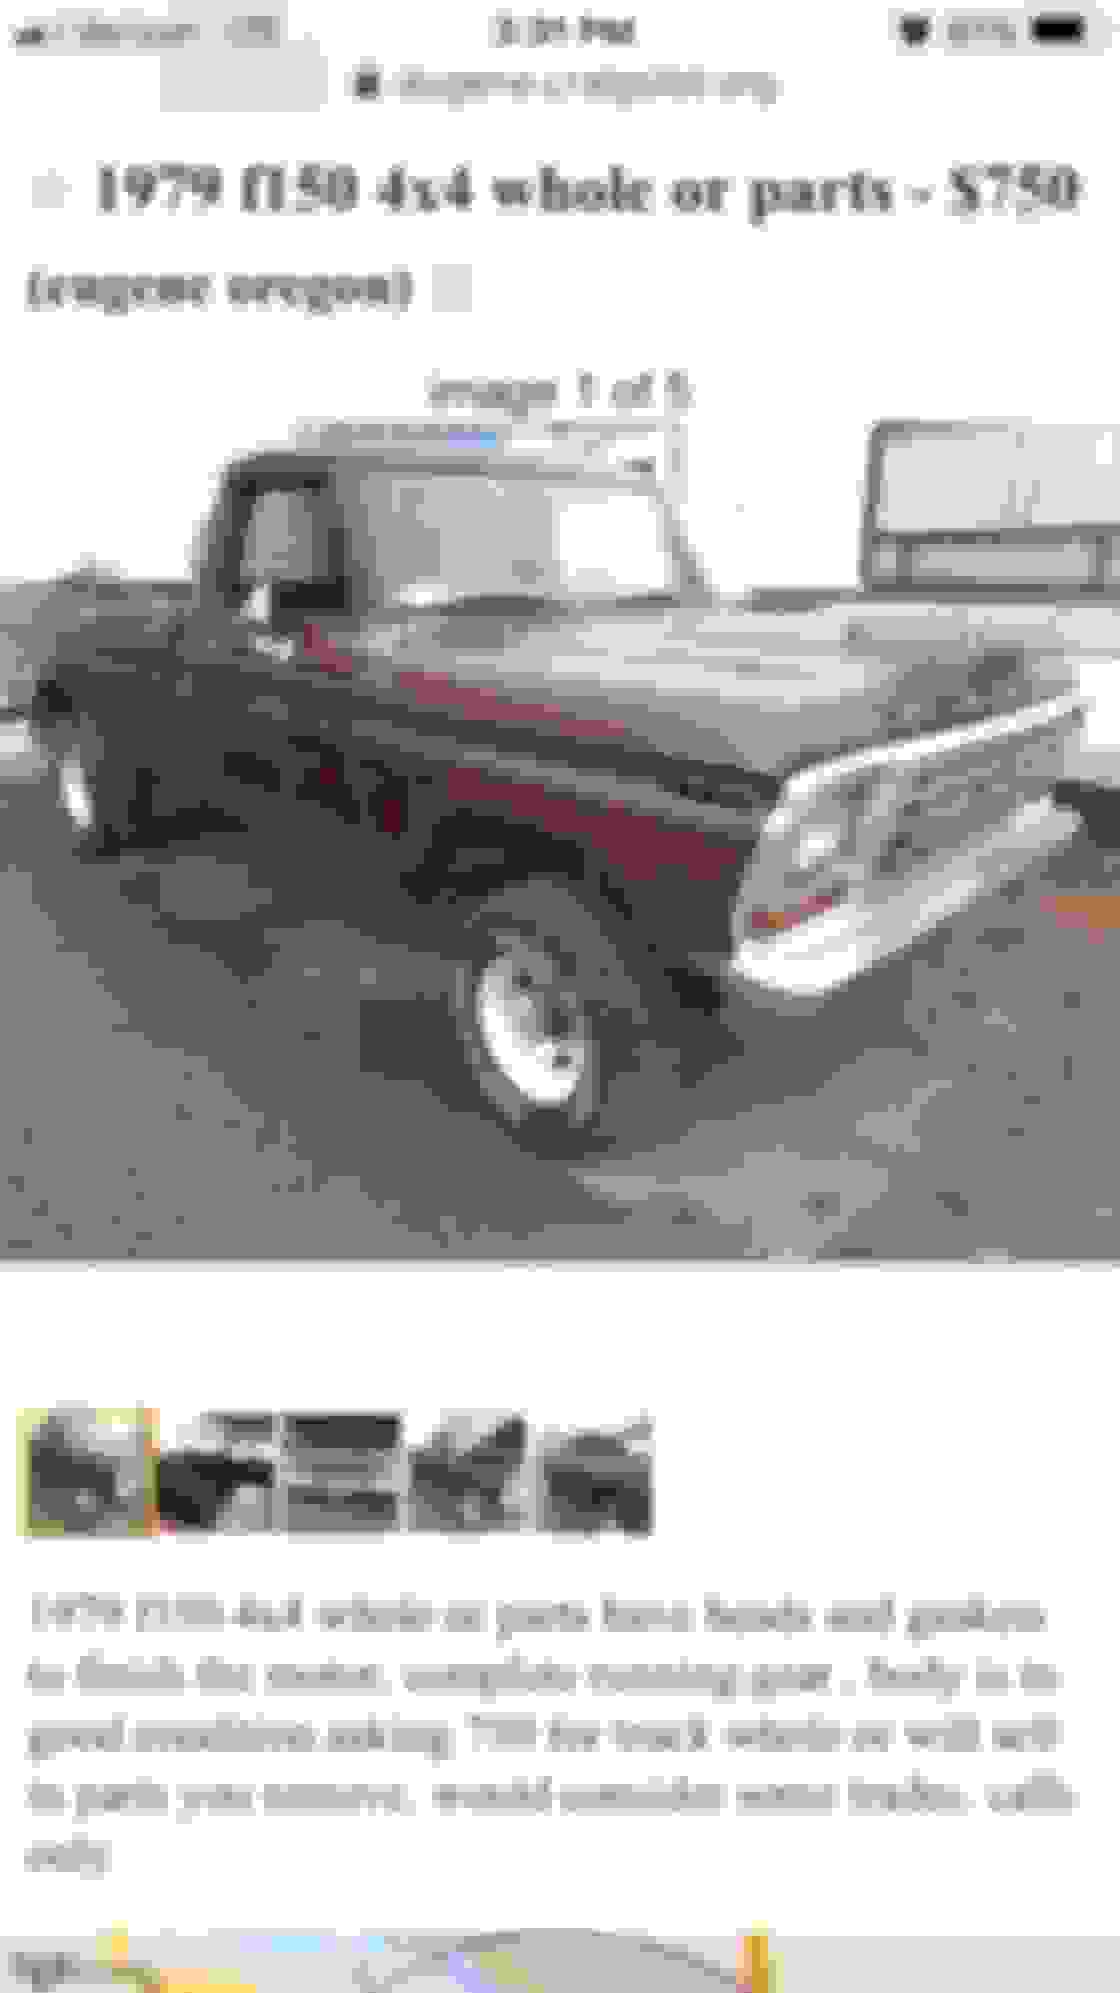 Craigslist find of the week! - Page 216 - Ford Truck ...